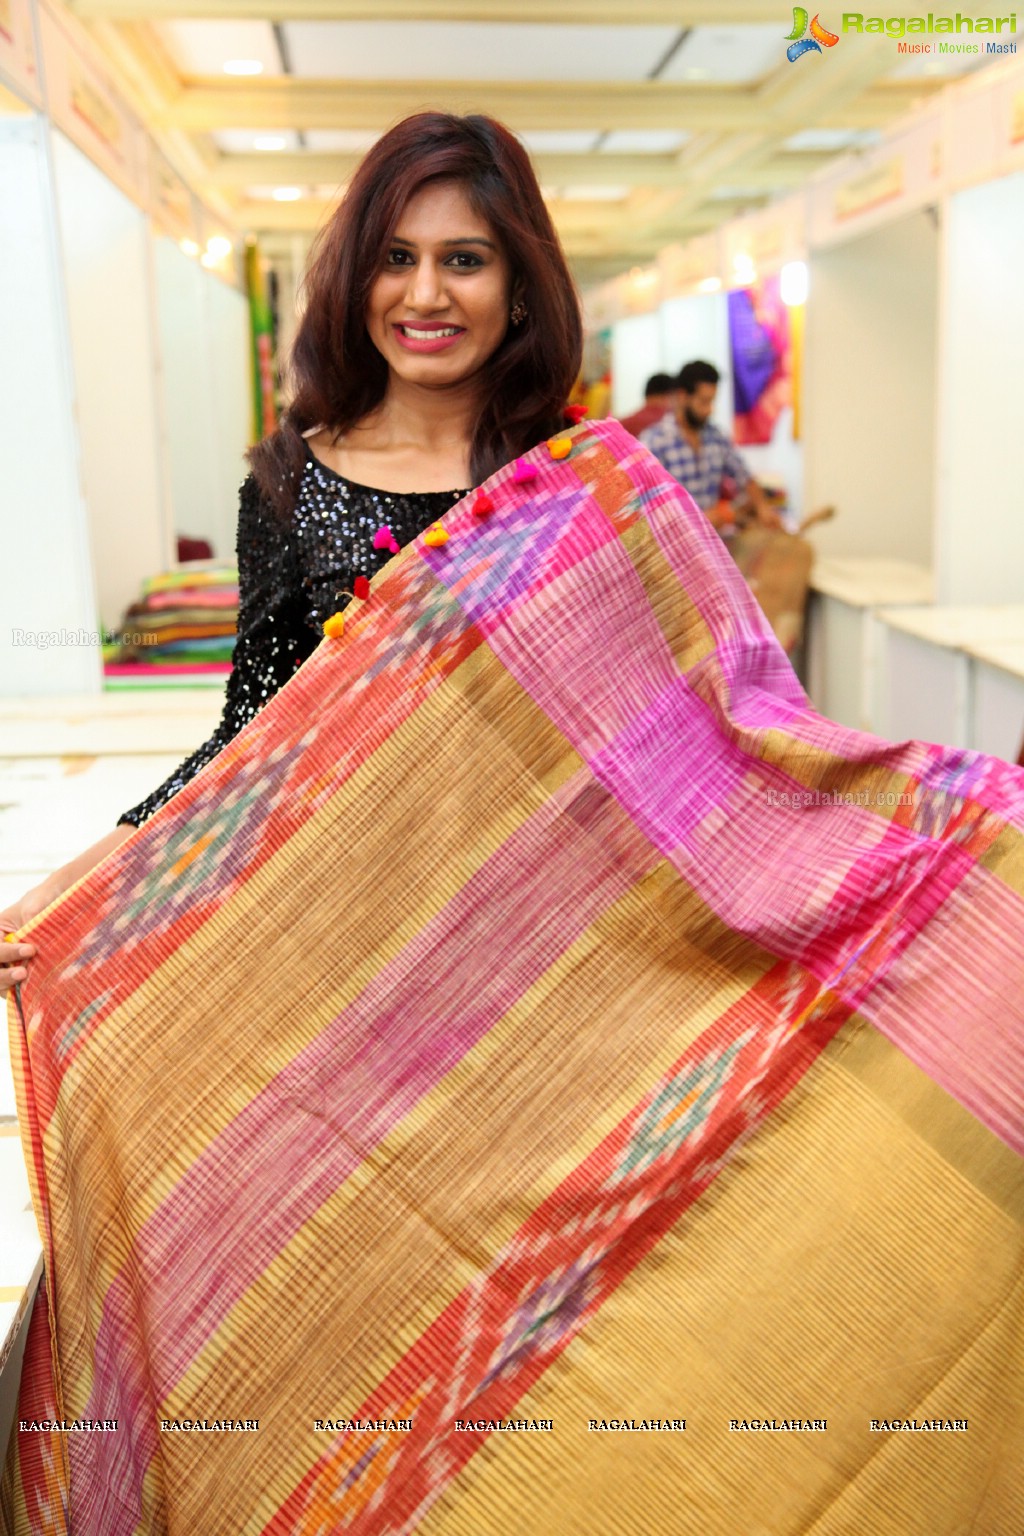 Silk India Expo 2017 Launch at Imperial Gardens, Secunderabad